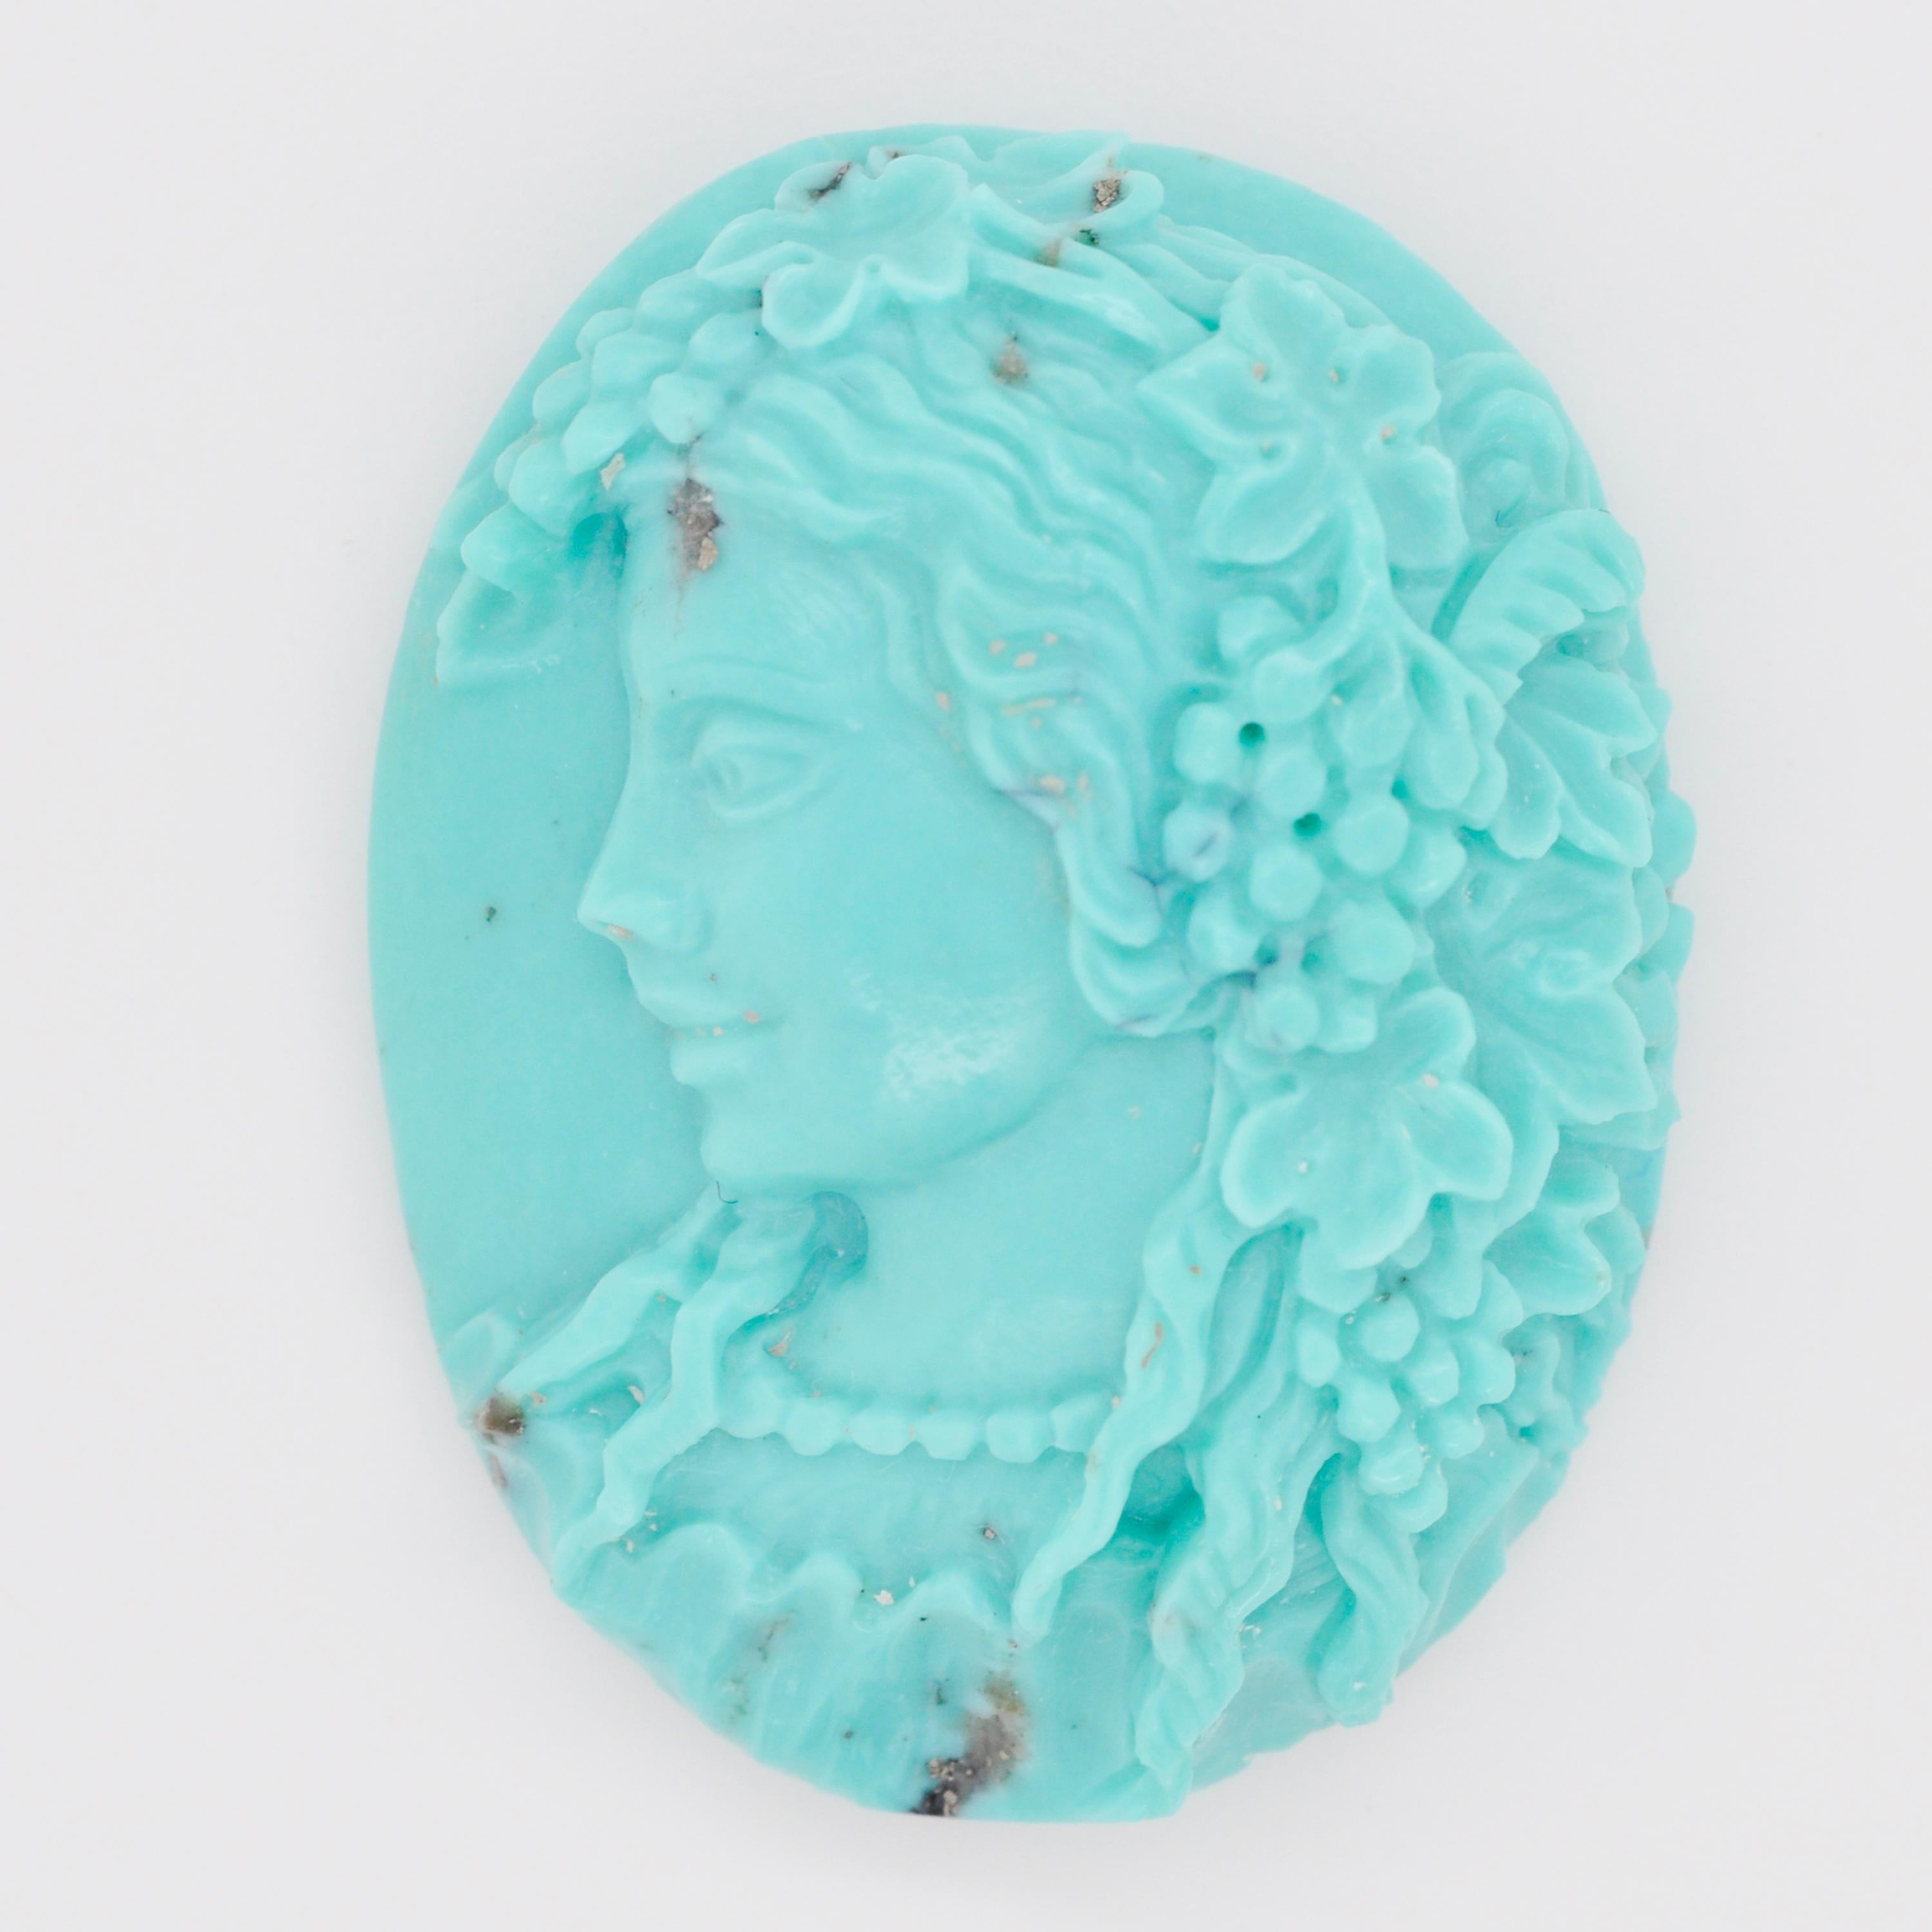 Contemporary 53.94 Carats Natural Arizona Turquoise Lady Cameo Carving Pendant Brooch For Sale